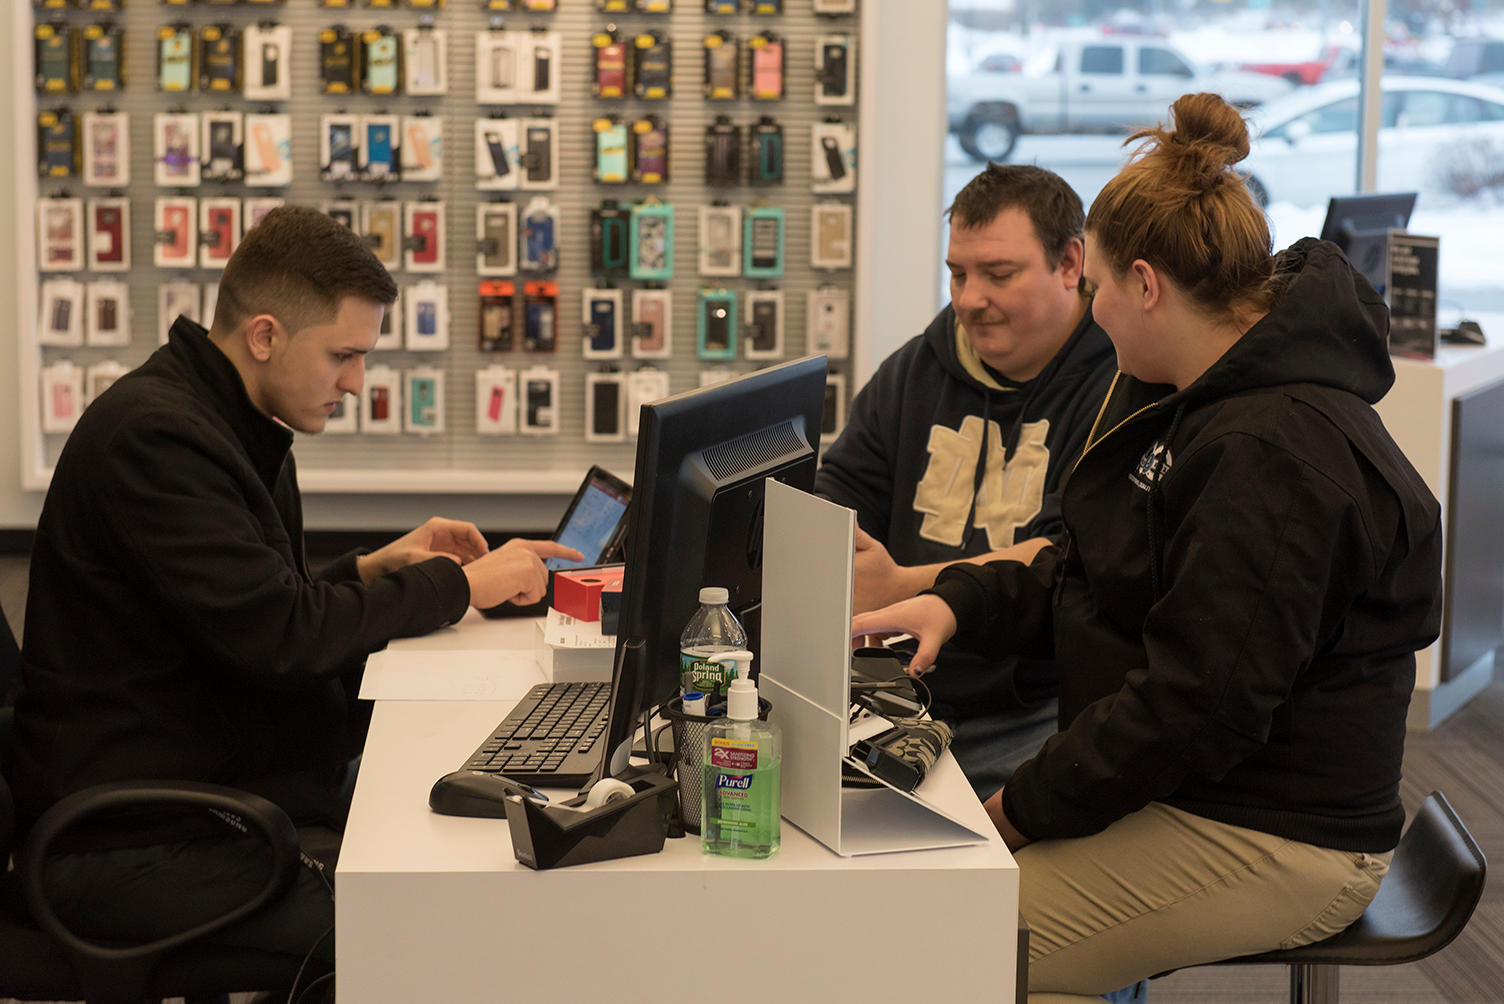 Wireless Zone® of Hooksett is your go-to local retailer for all your Verizon needs.